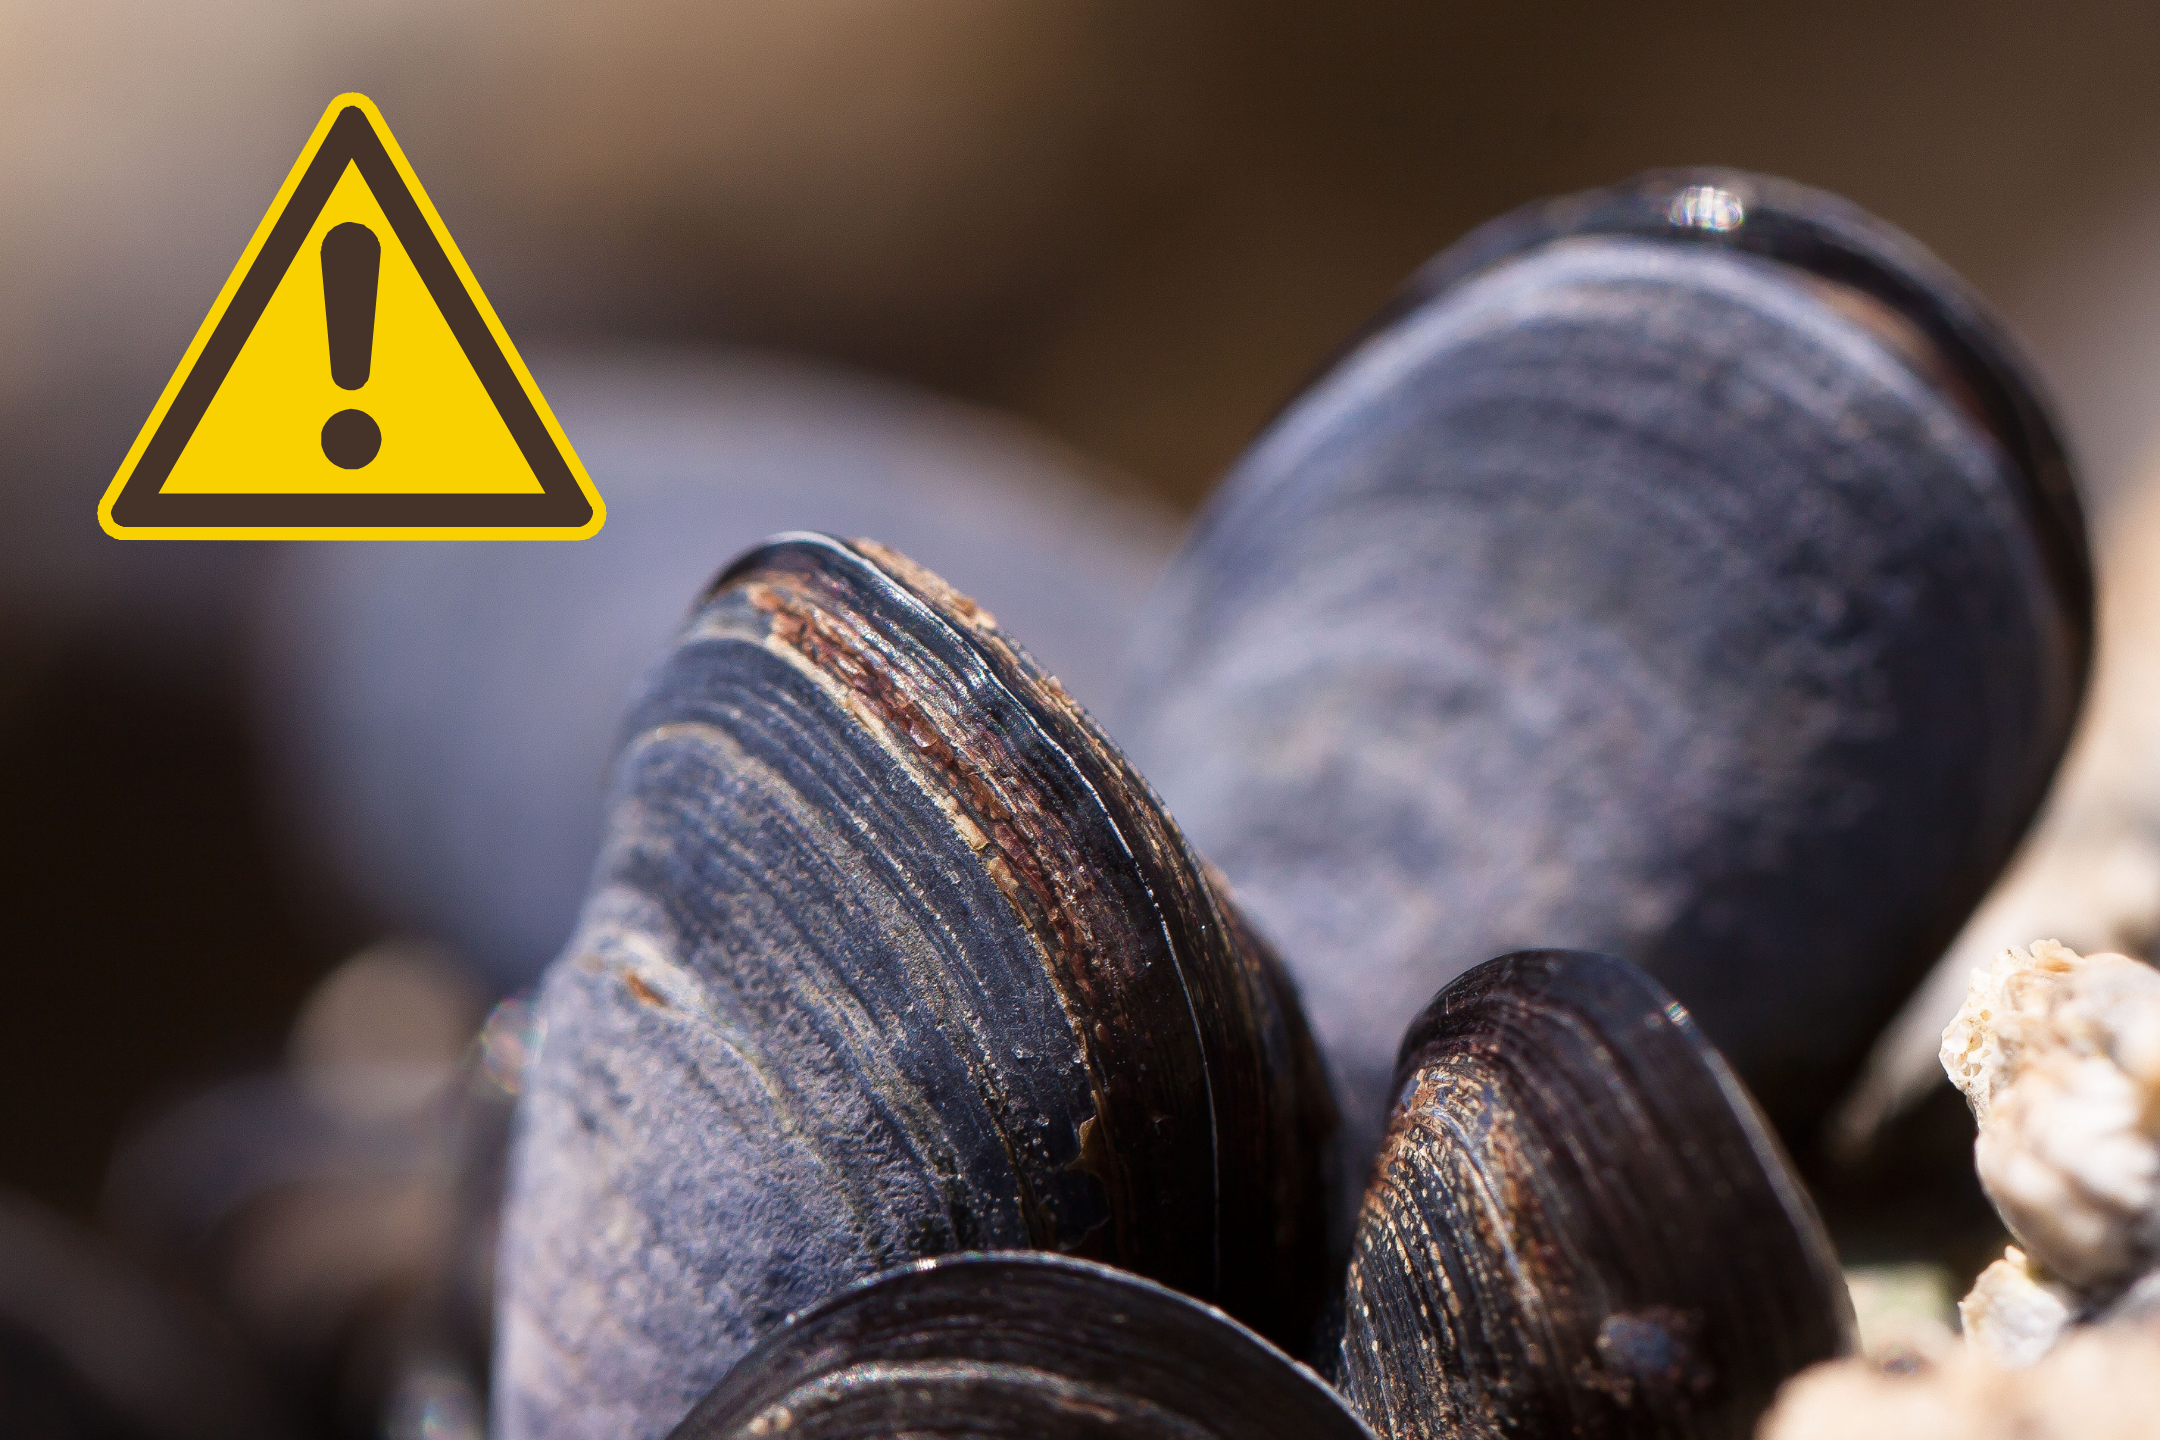 Mussels with yellow alert icon